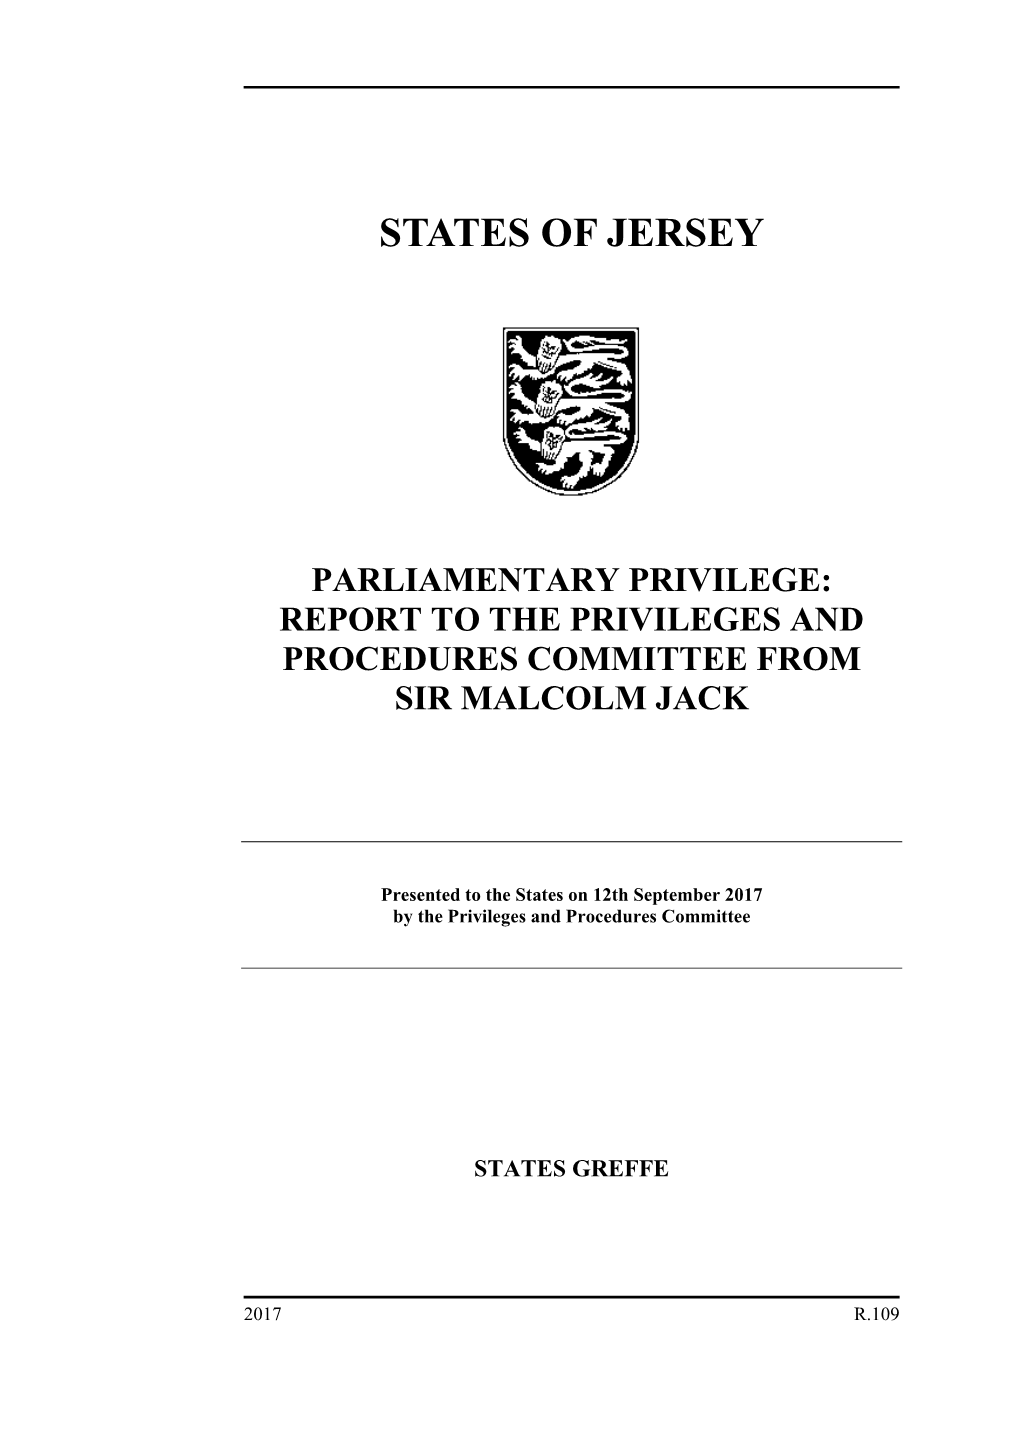 Parliamentary Privilege: Report to the Privileges and Procedures Committee from Sir Malcolm Jack